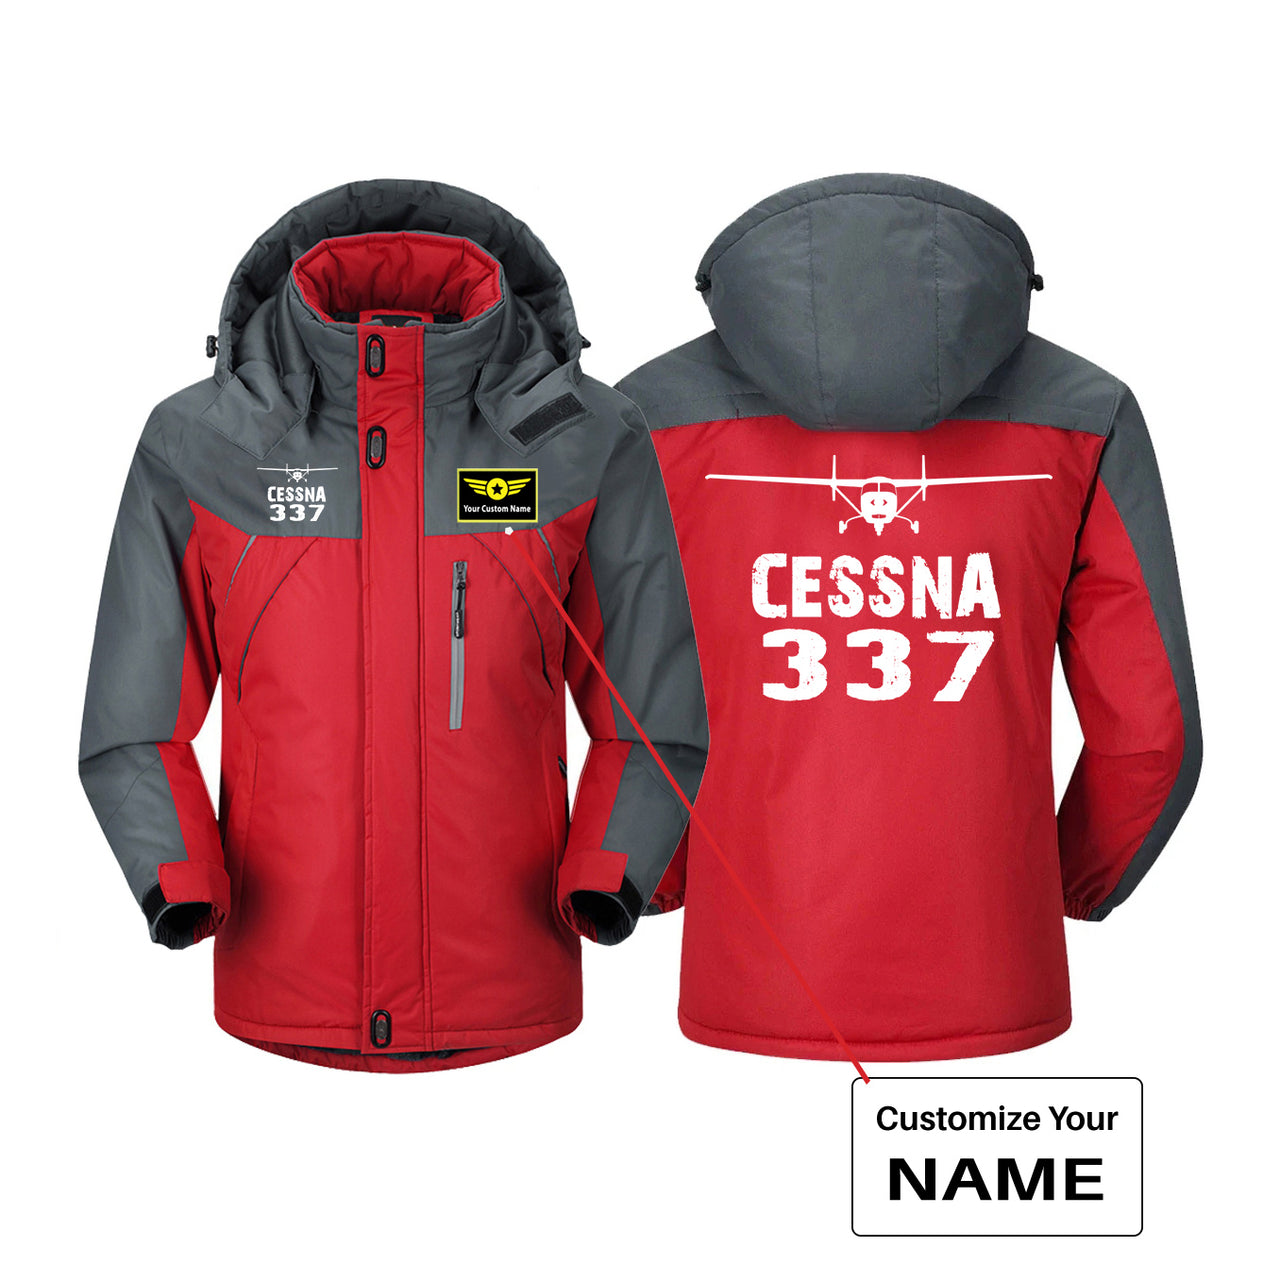 Cessna 337 & Plane Designed Thick Winter Jackets